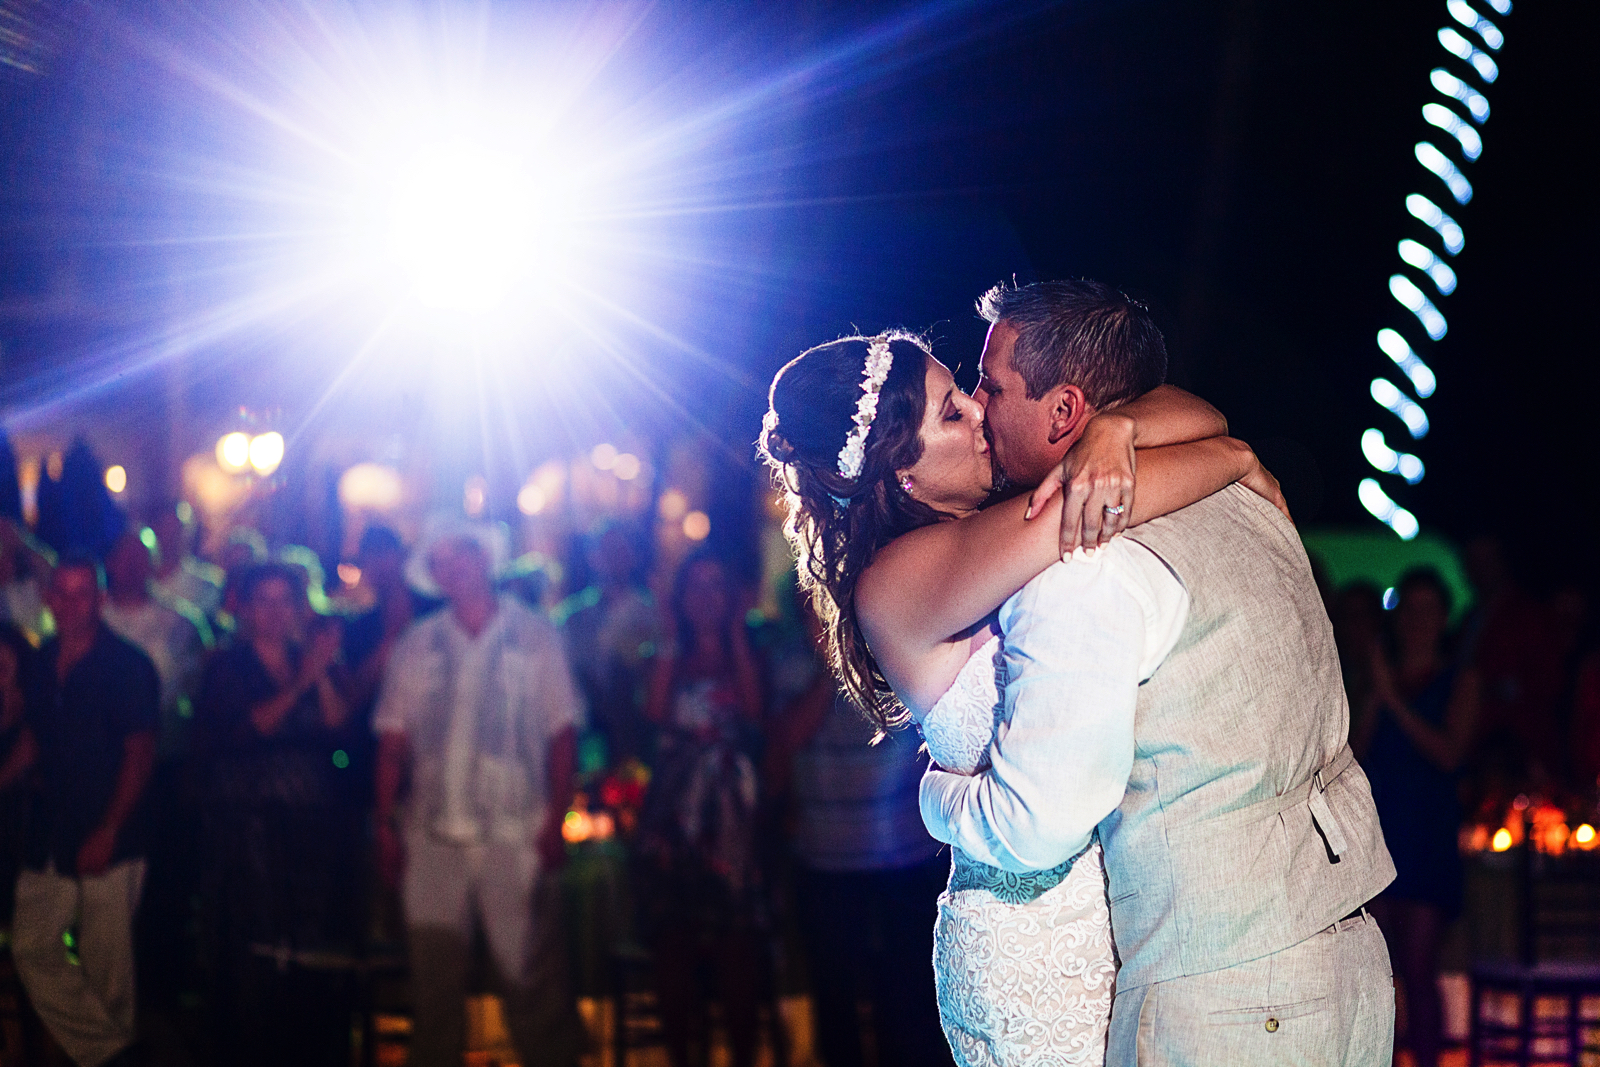 Groom and bride kissing on the dance floor during their entrance to the wedding reception